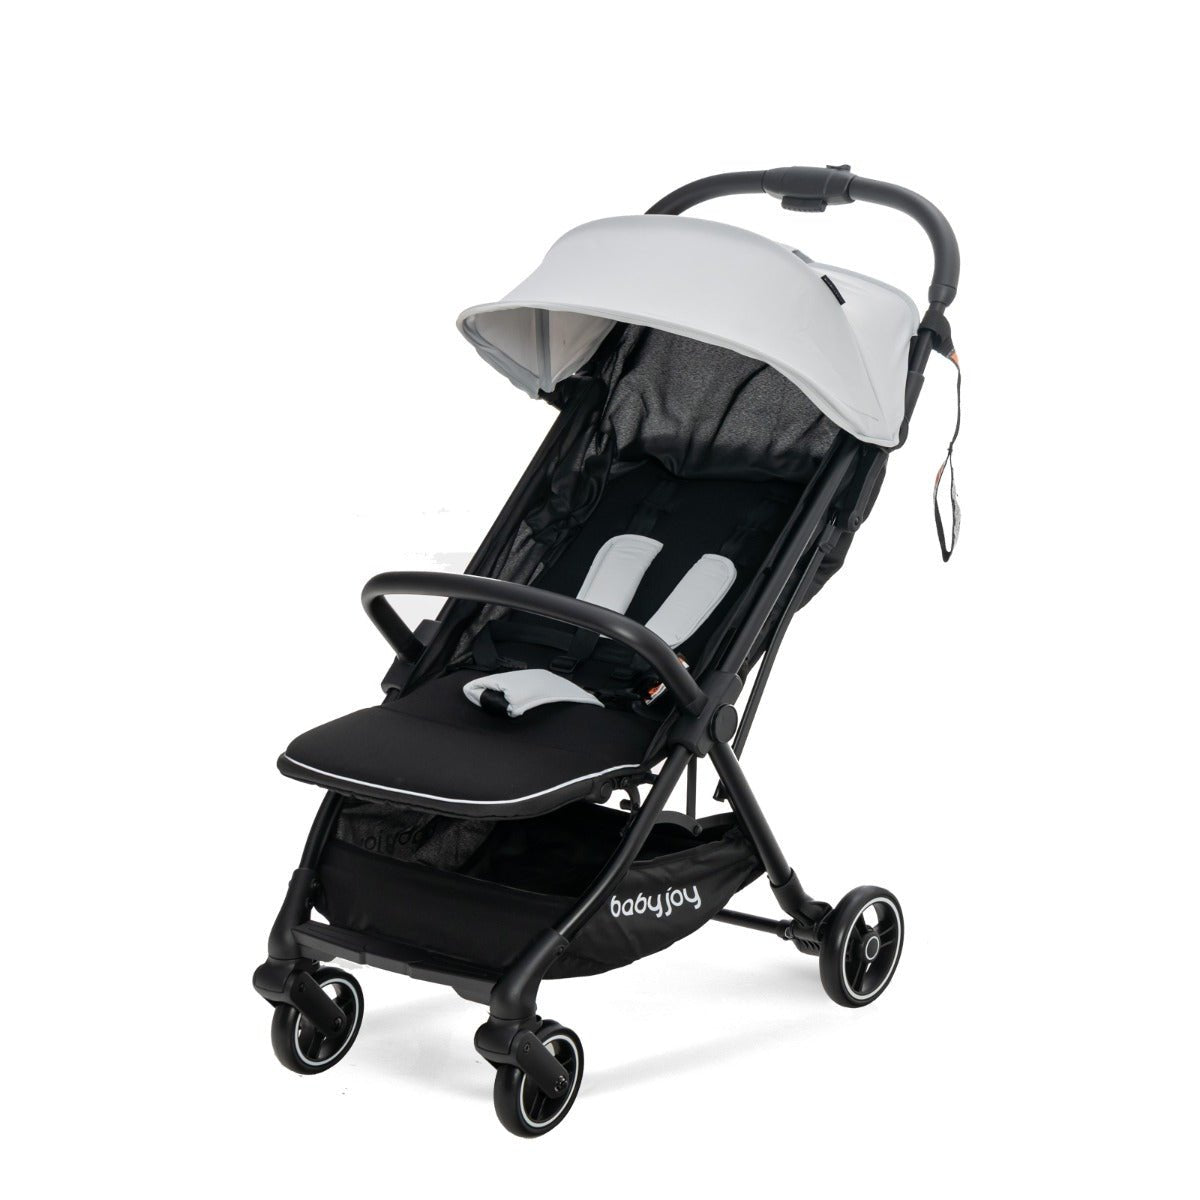 Grey Folding Infant Stroller with Adjustable Canopy